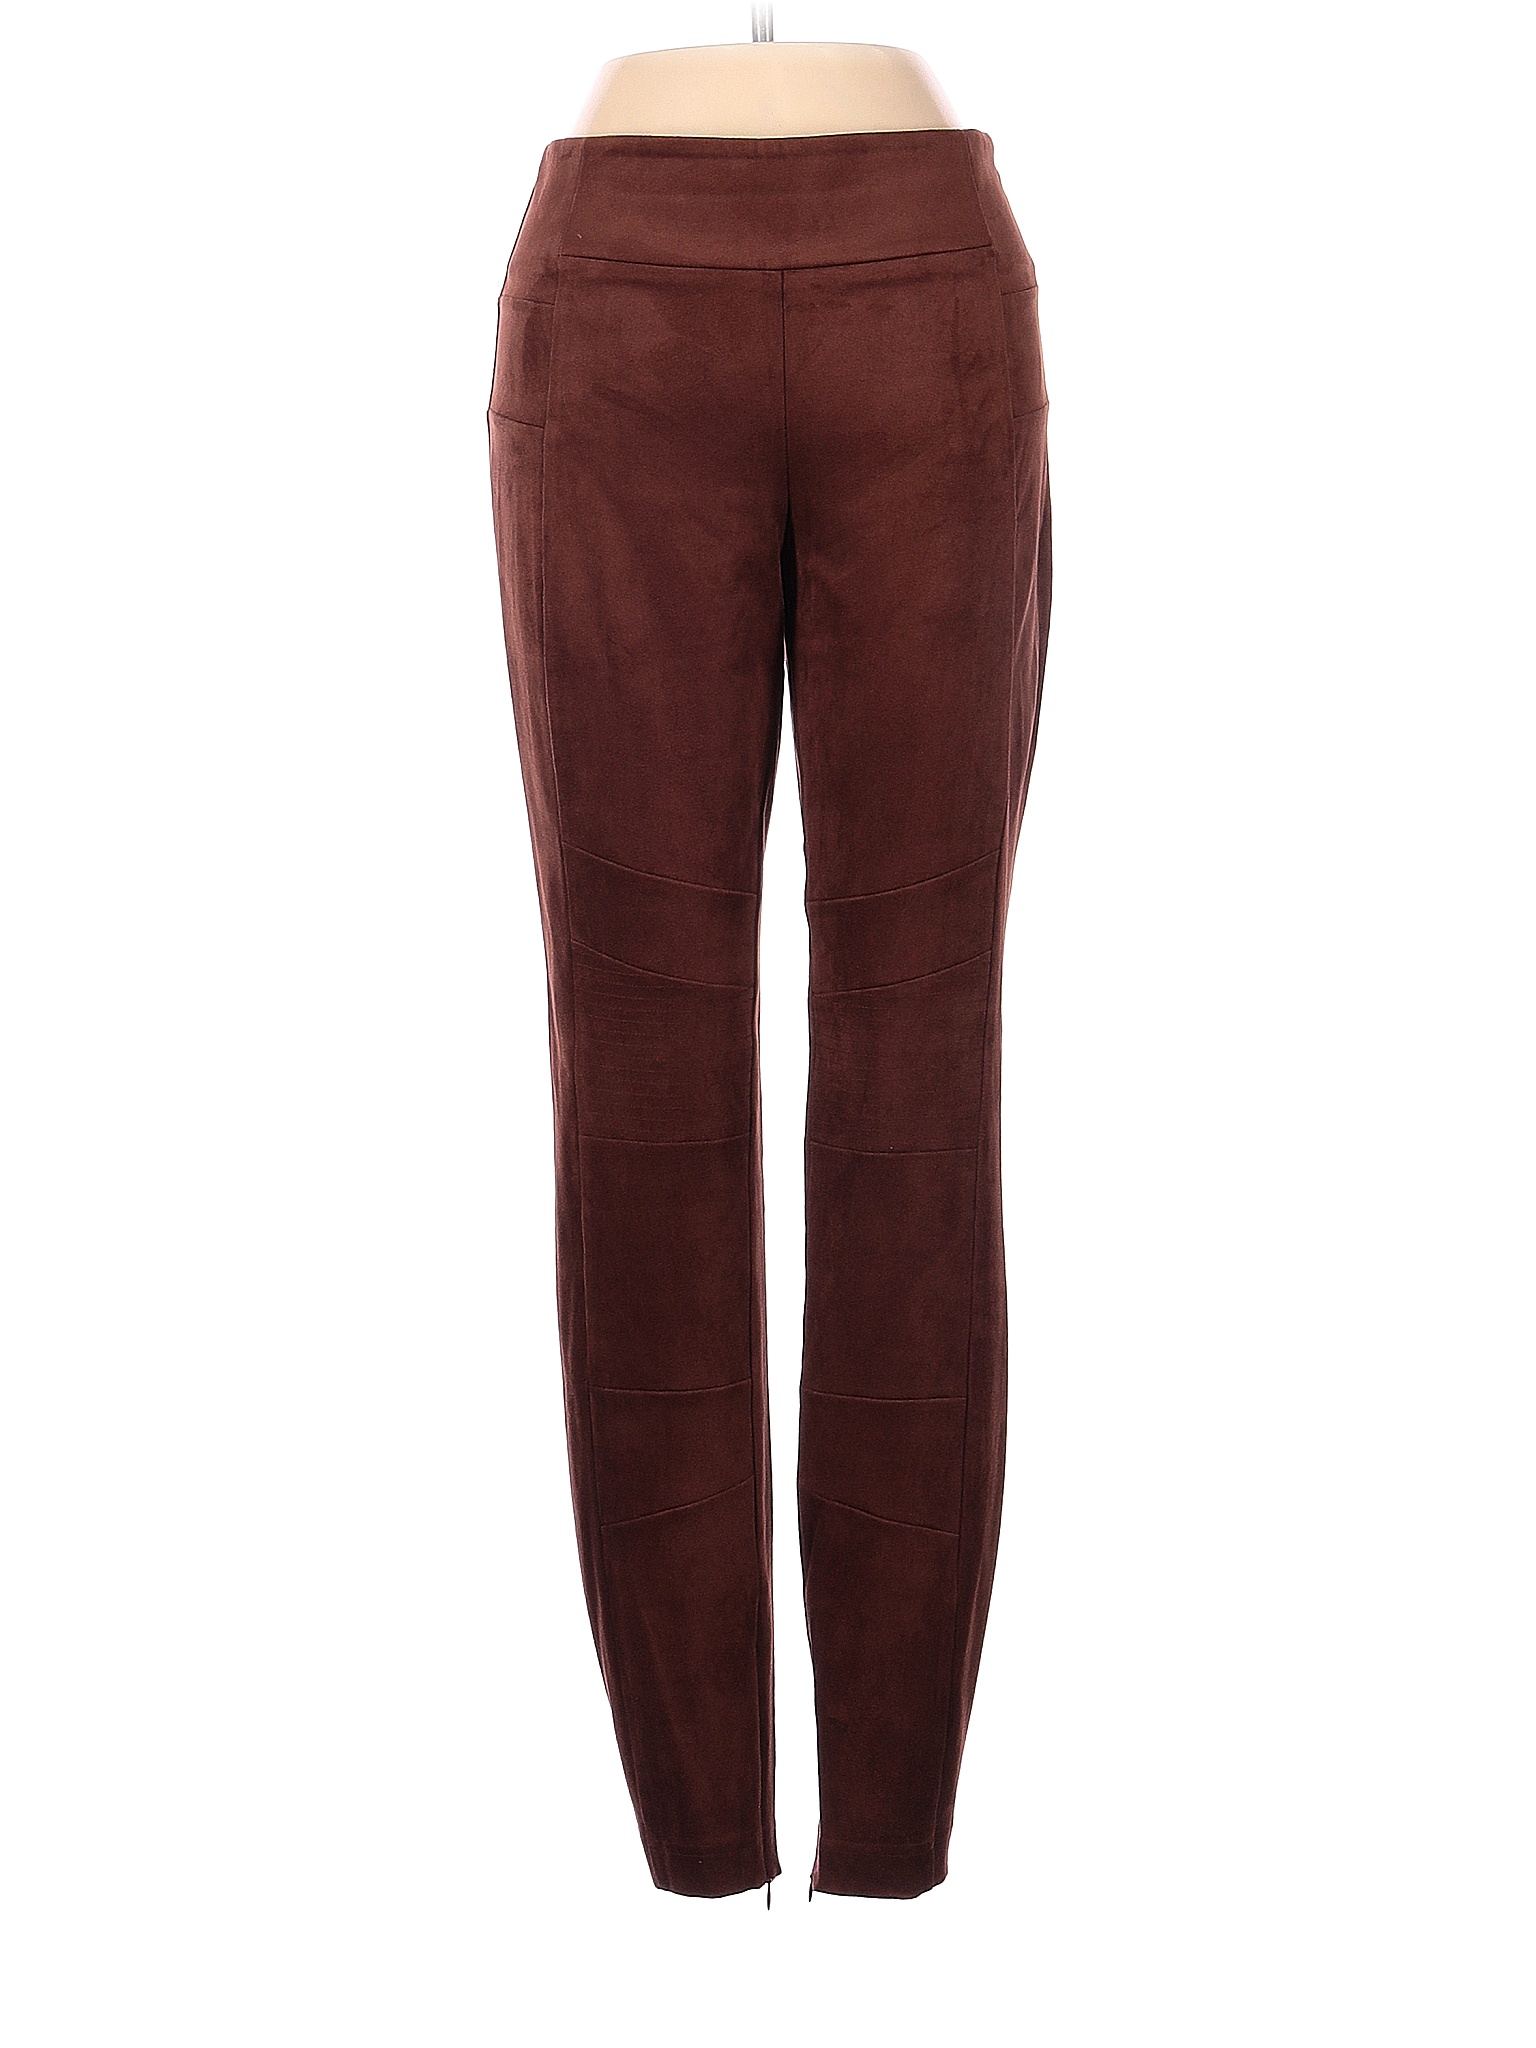 Sundance Colored Brown Casual Pants Size 4 - 78% off | thredUP